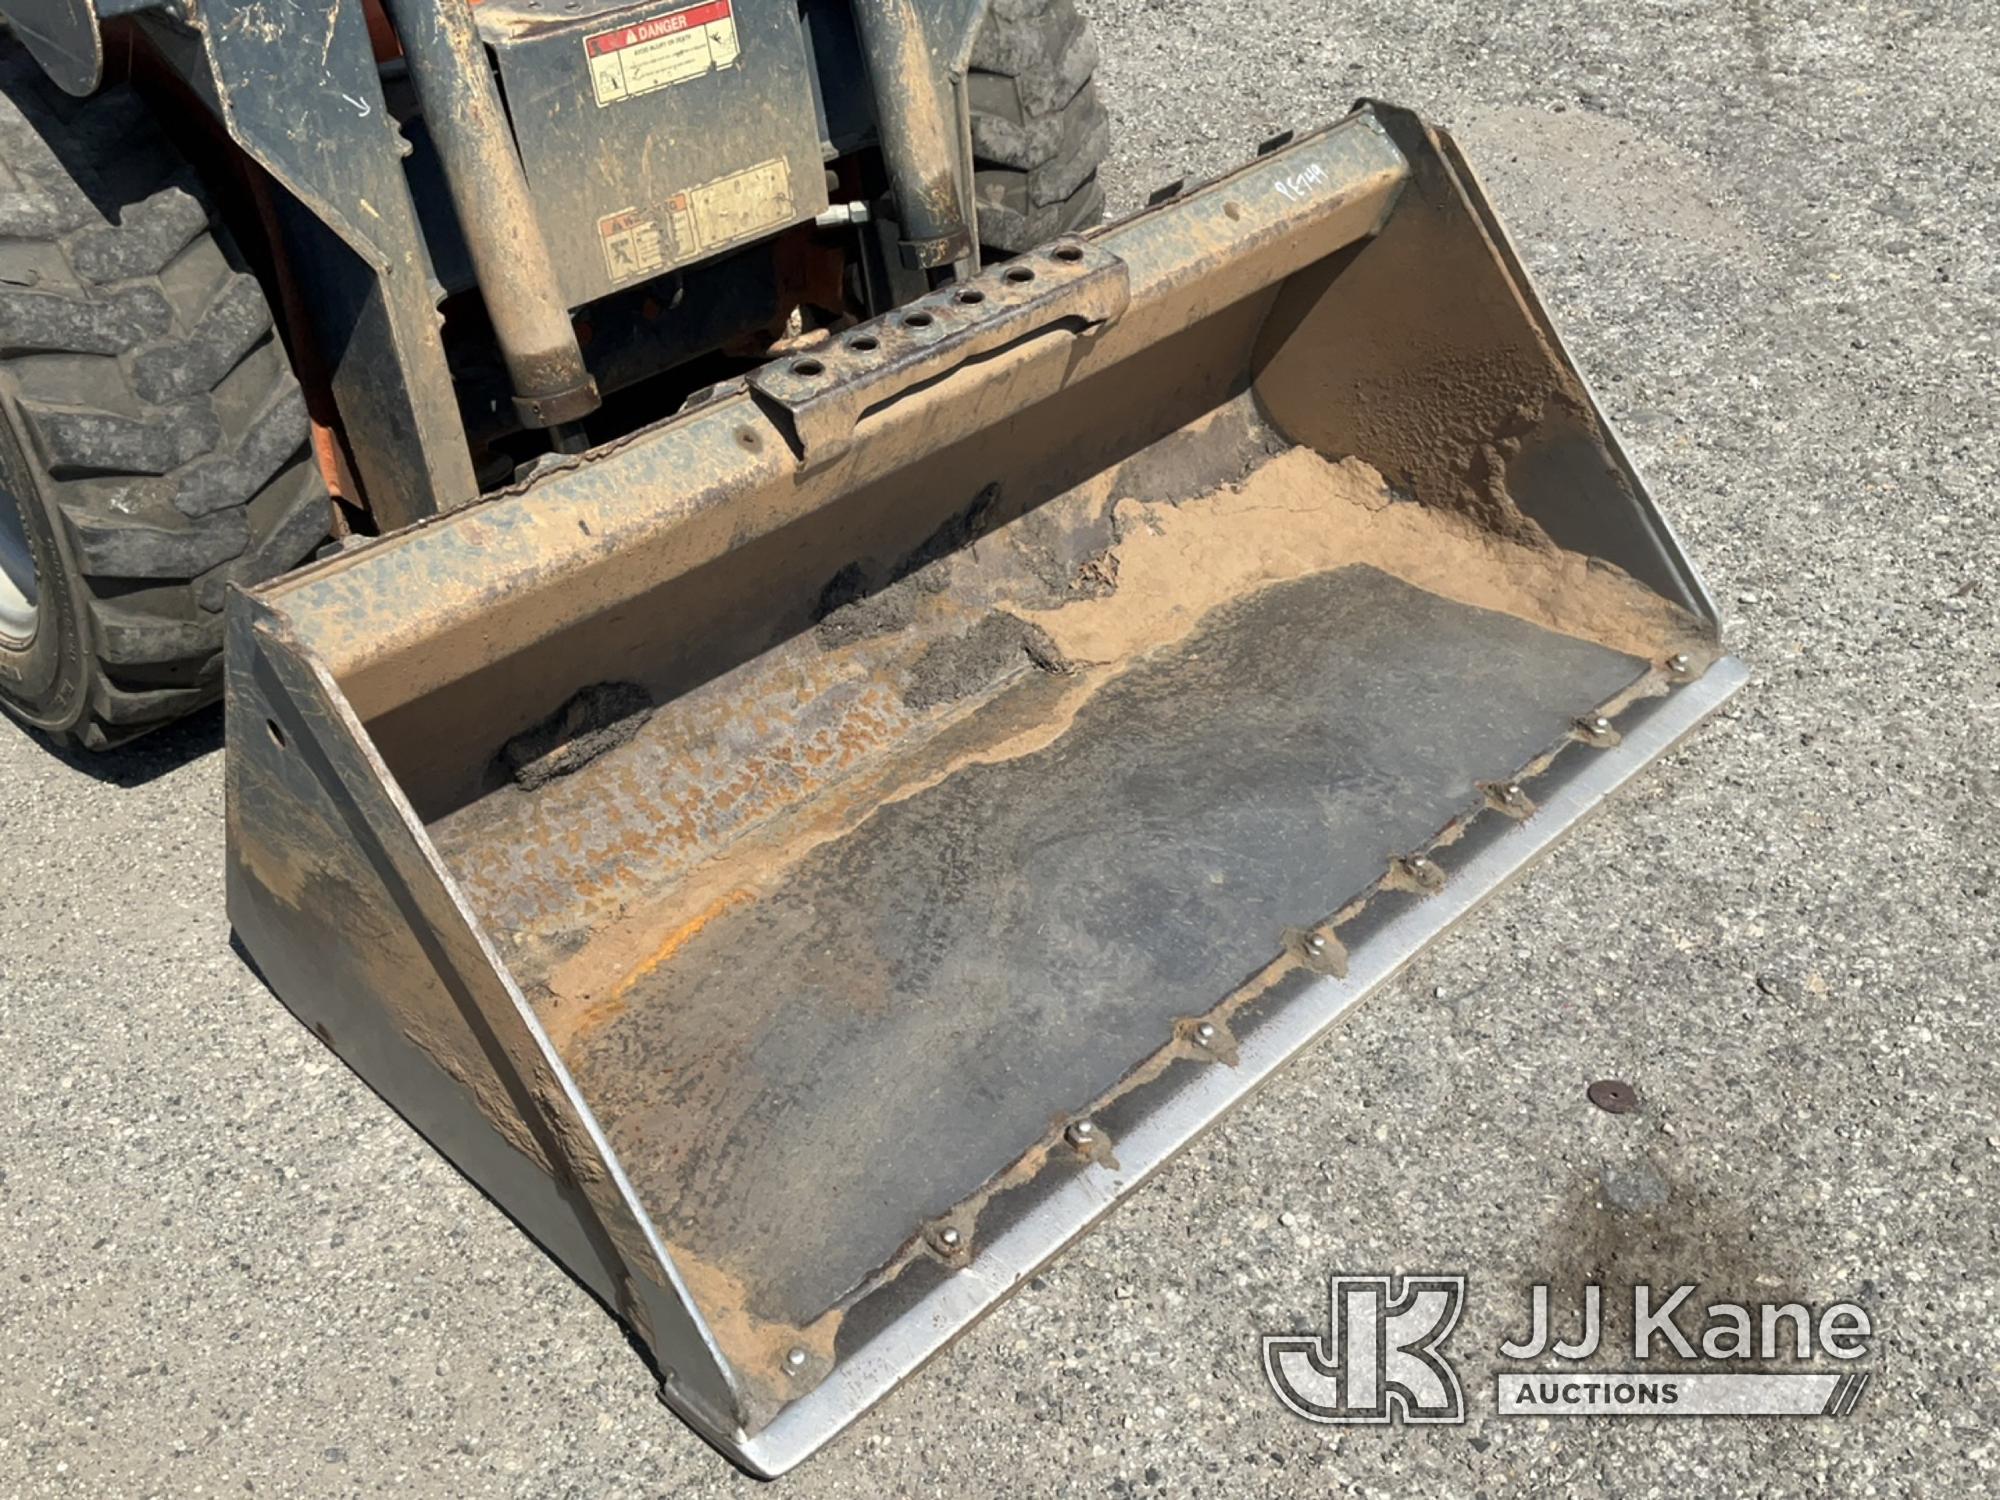 (Plymouth Meeting, PA) 2018 Gehl R105 Rubber Tired Skid Steer Loader Runs, Moves & Operates